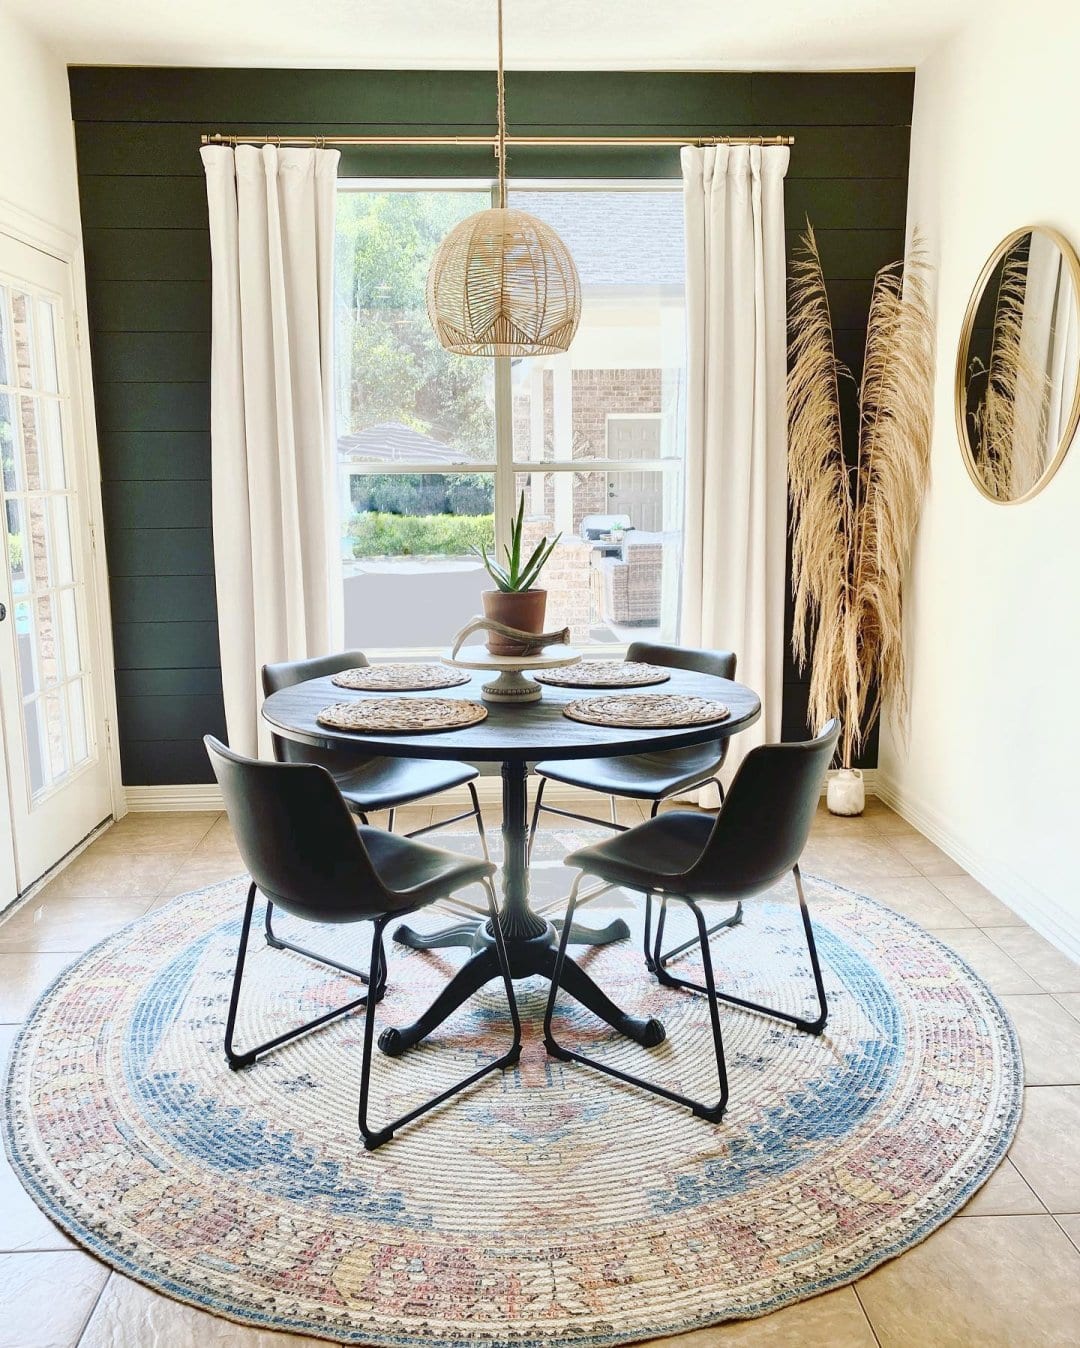 How To Decorate A Round Dining Table, Round Table Setup Ideas